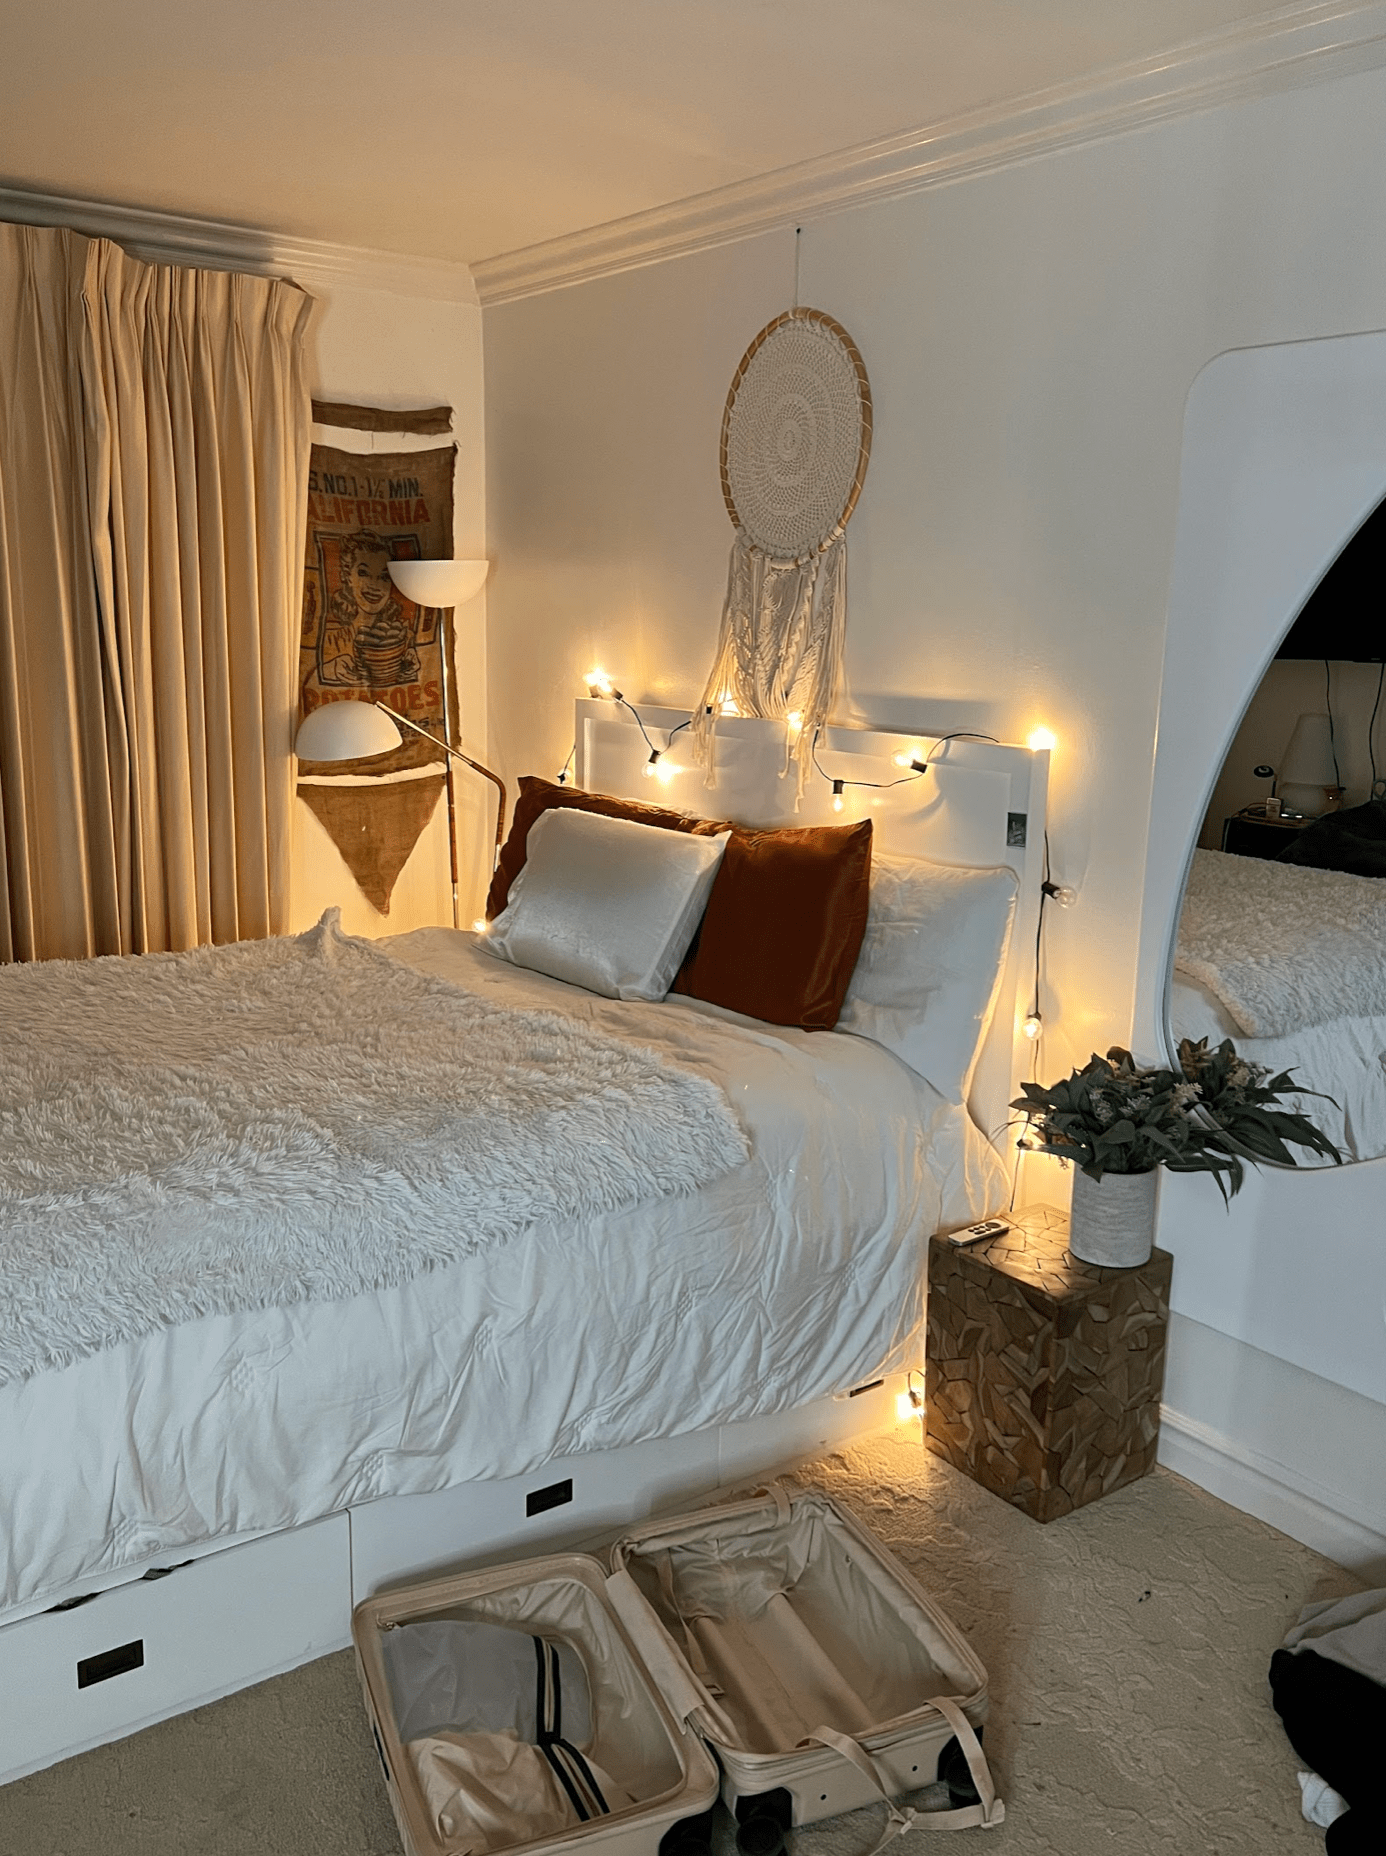 white platform bed with dream catcher and fairy lights hanging above it